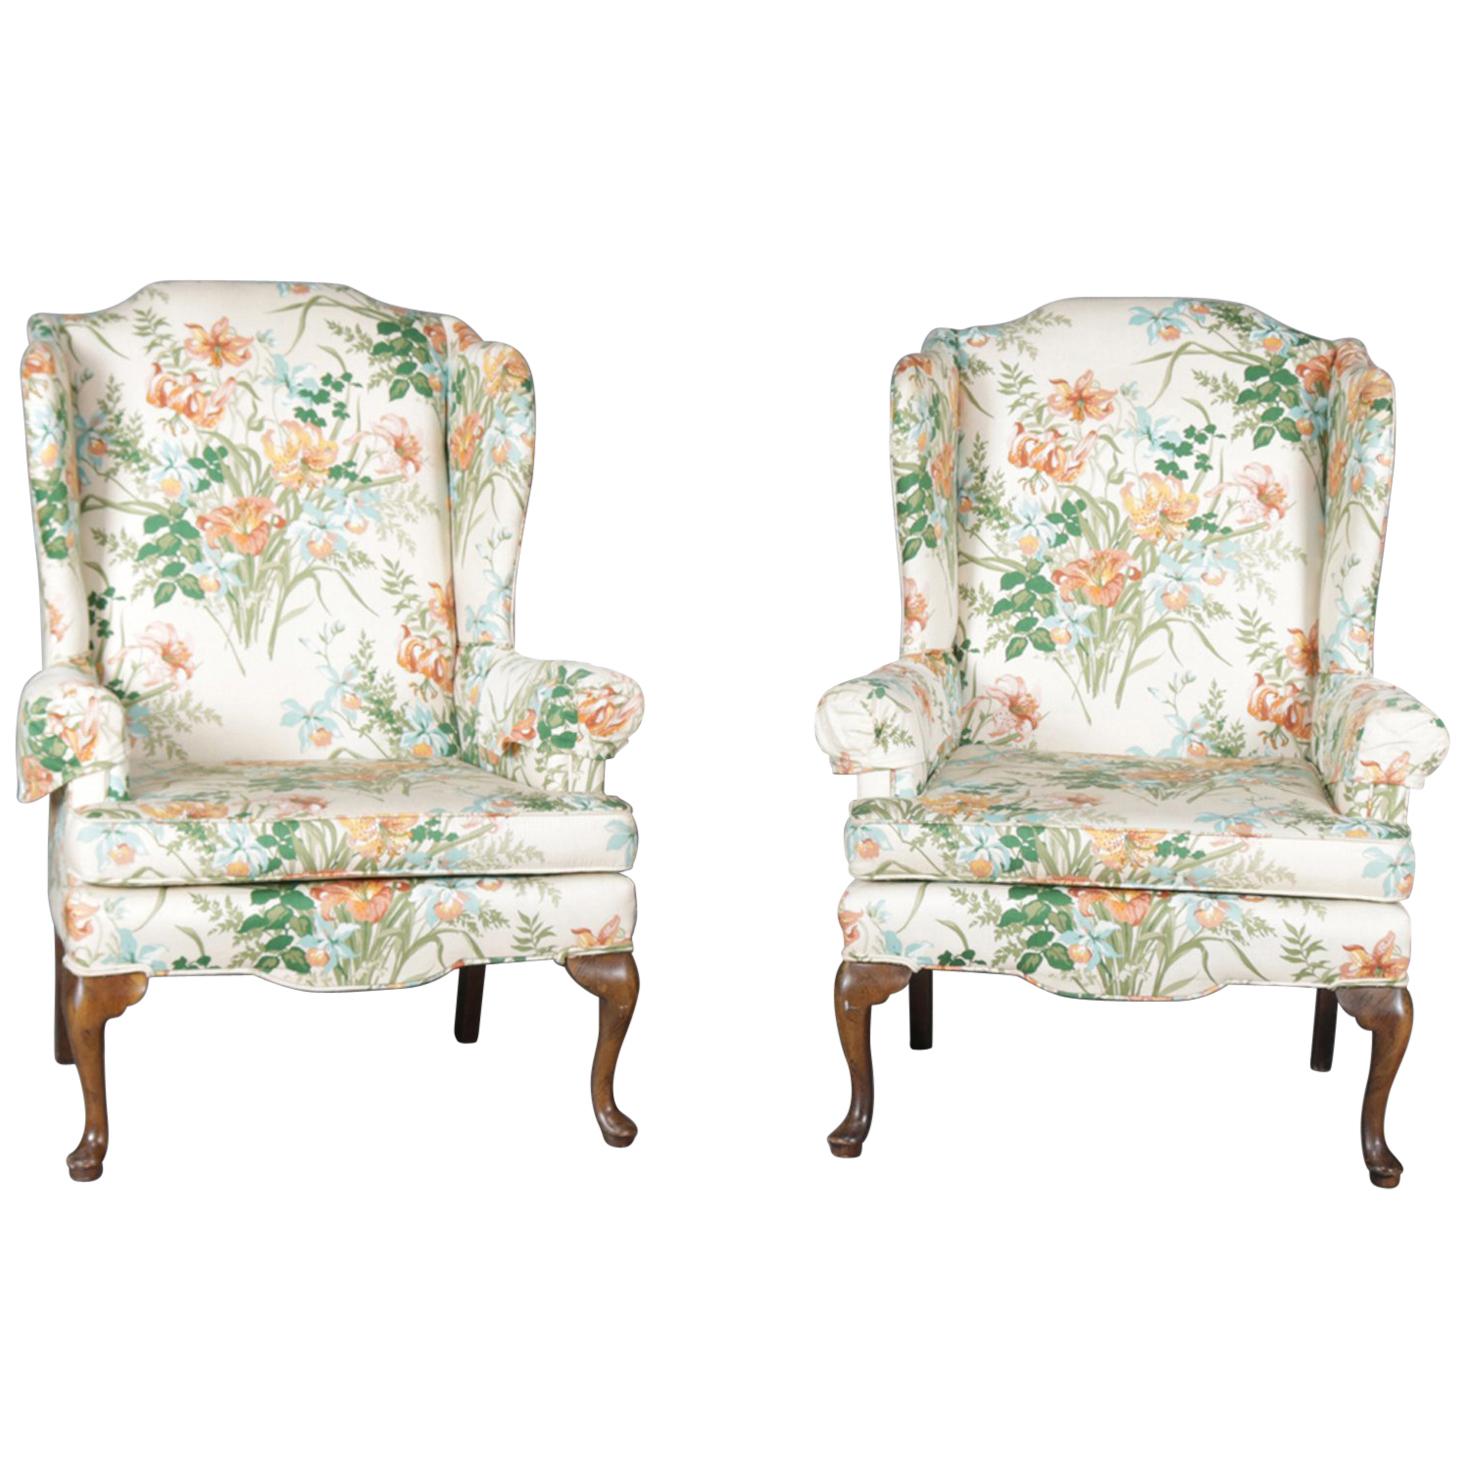 Pair of Queen Anne Floral Fireside Wingback Chairs, Tigerlily Print, circa 1930